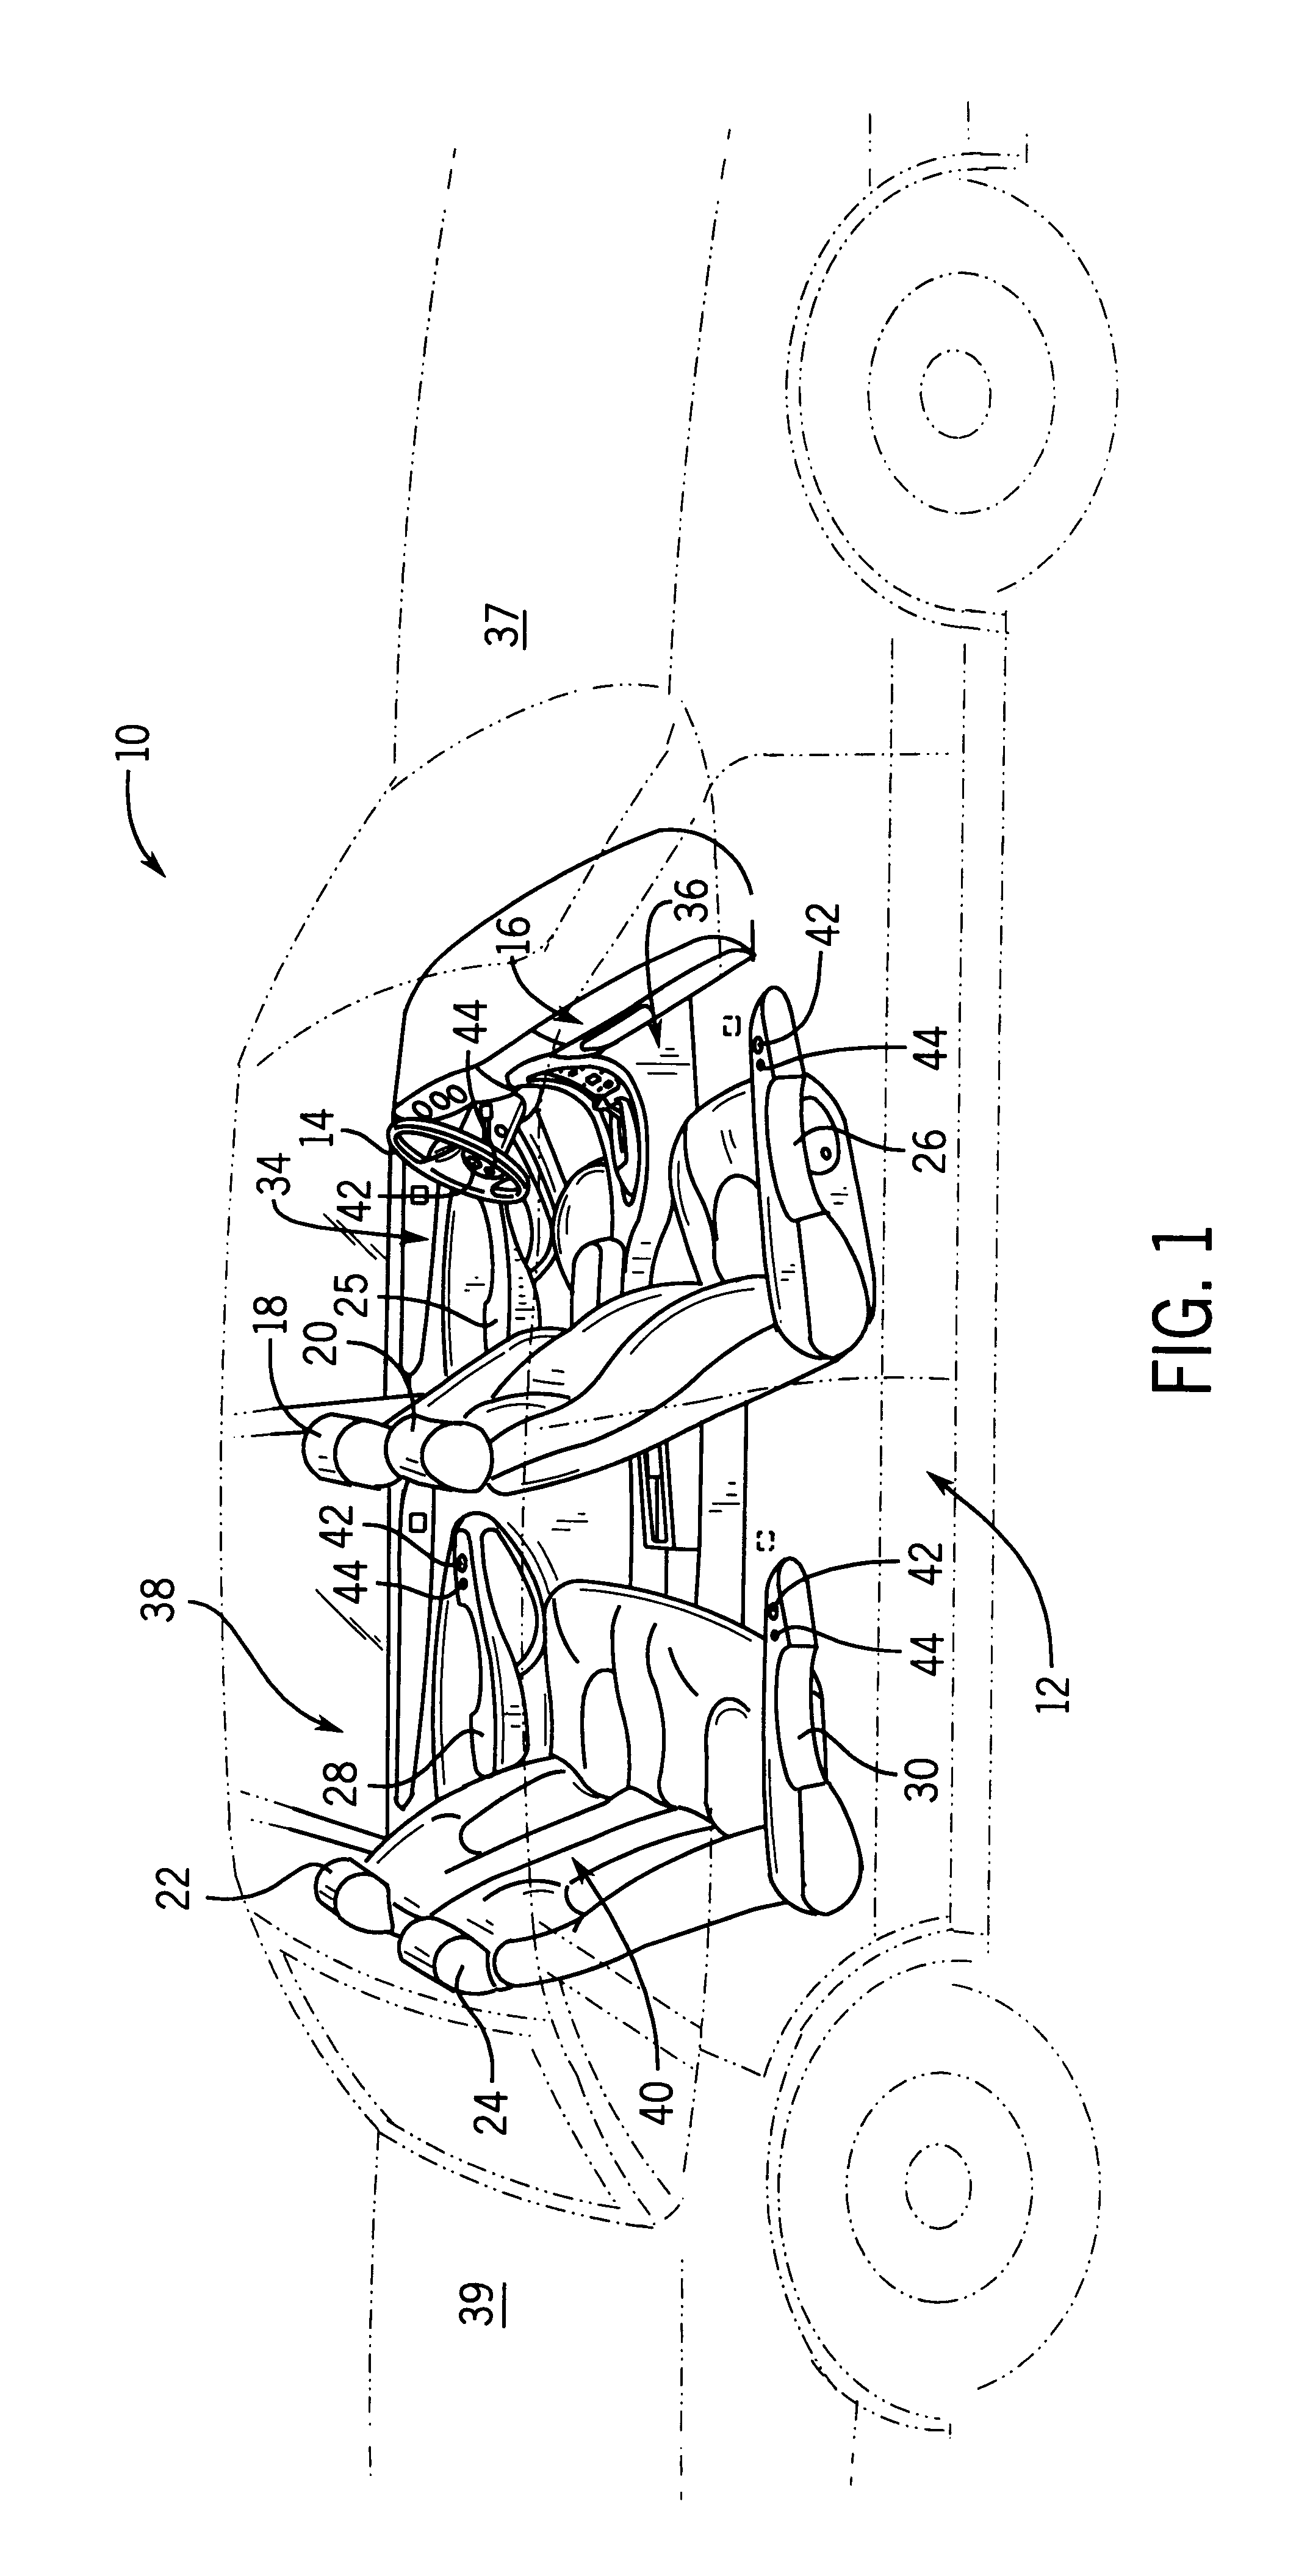 Method and apparatus for controlling multiple speech engines in an in-vehicle speech recognition system